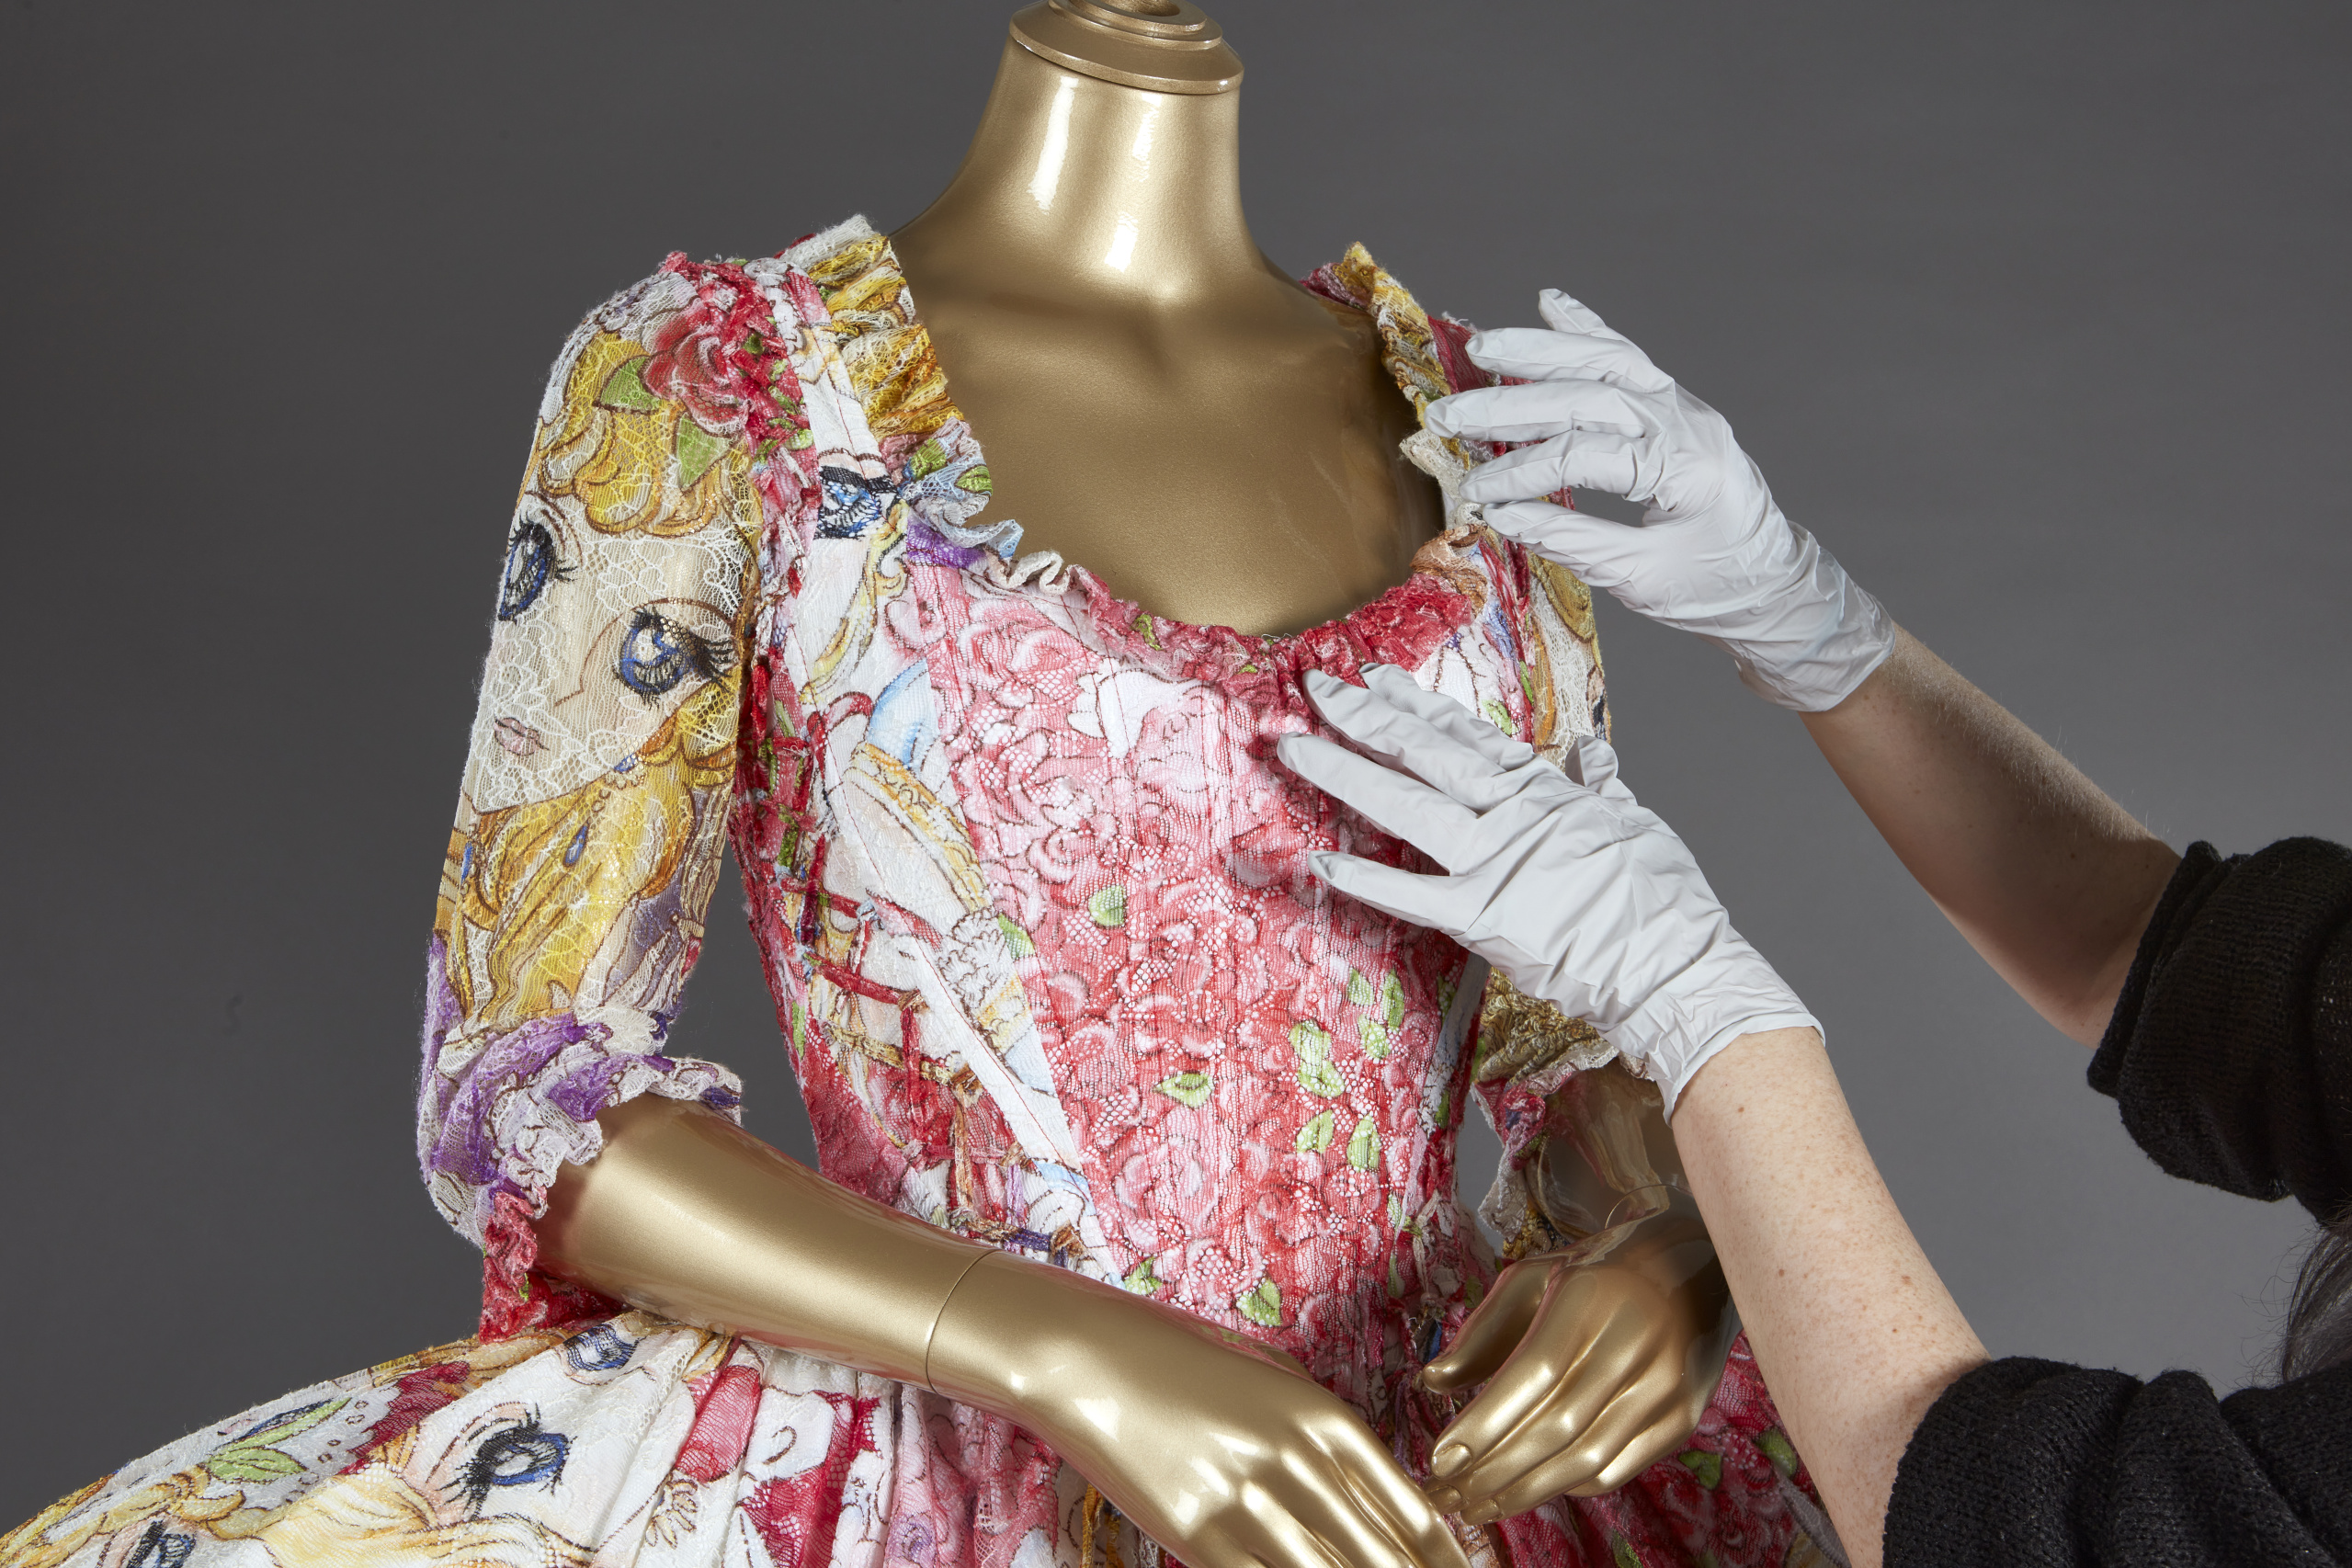 Crown to Couture, a major exhibition at Kensington Palace, examines and celebrates how fashion from the royal Georgian court has inspired red-carpet catwalk designs in the 21st century.